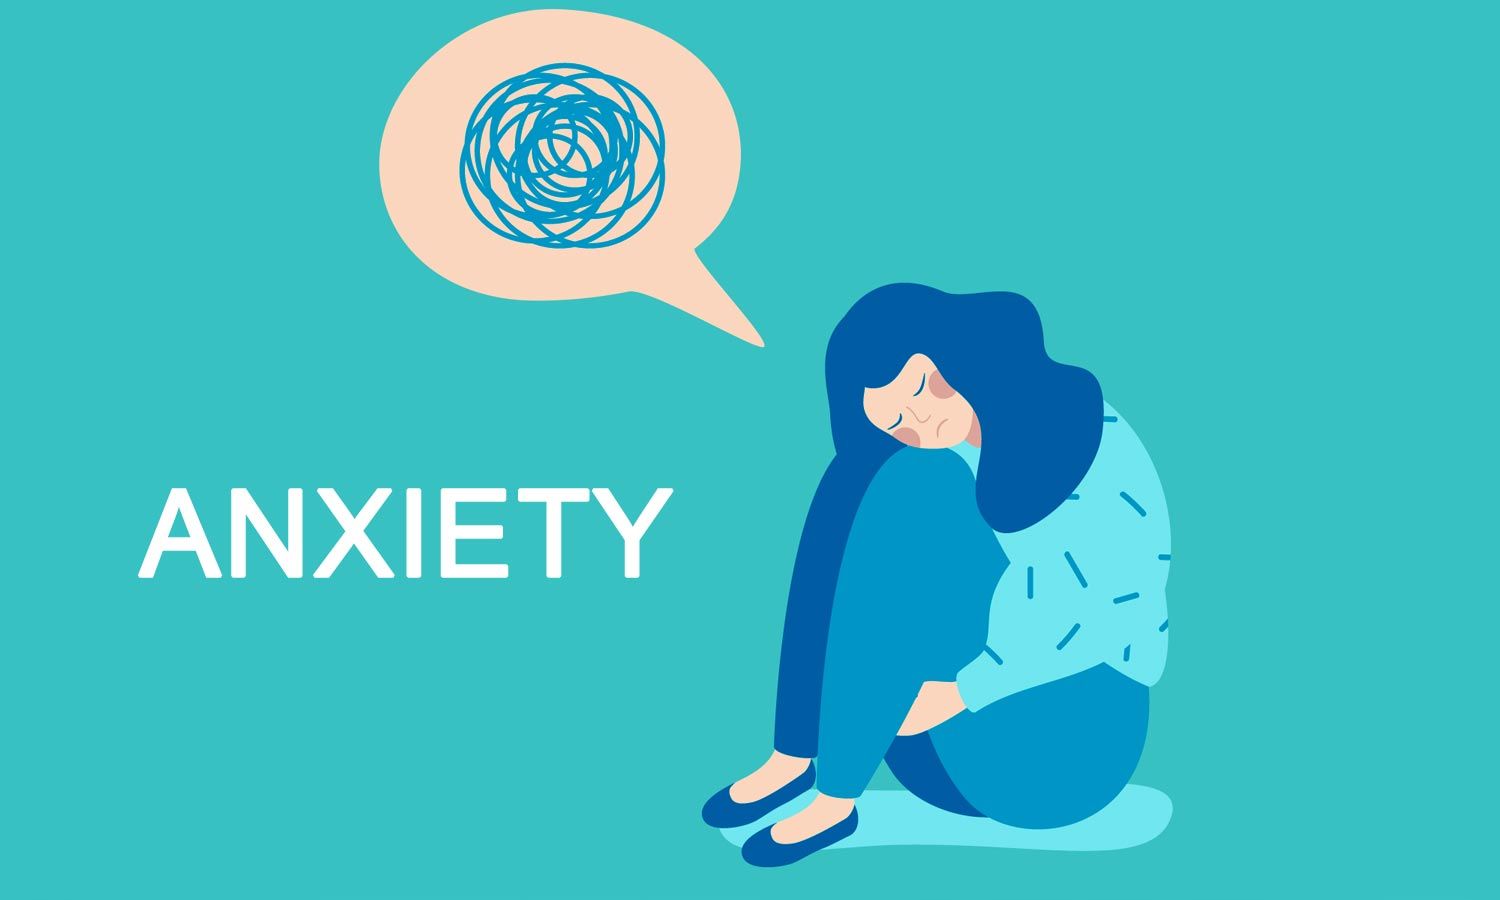 Top 10 Ways to Deal with Anxiety